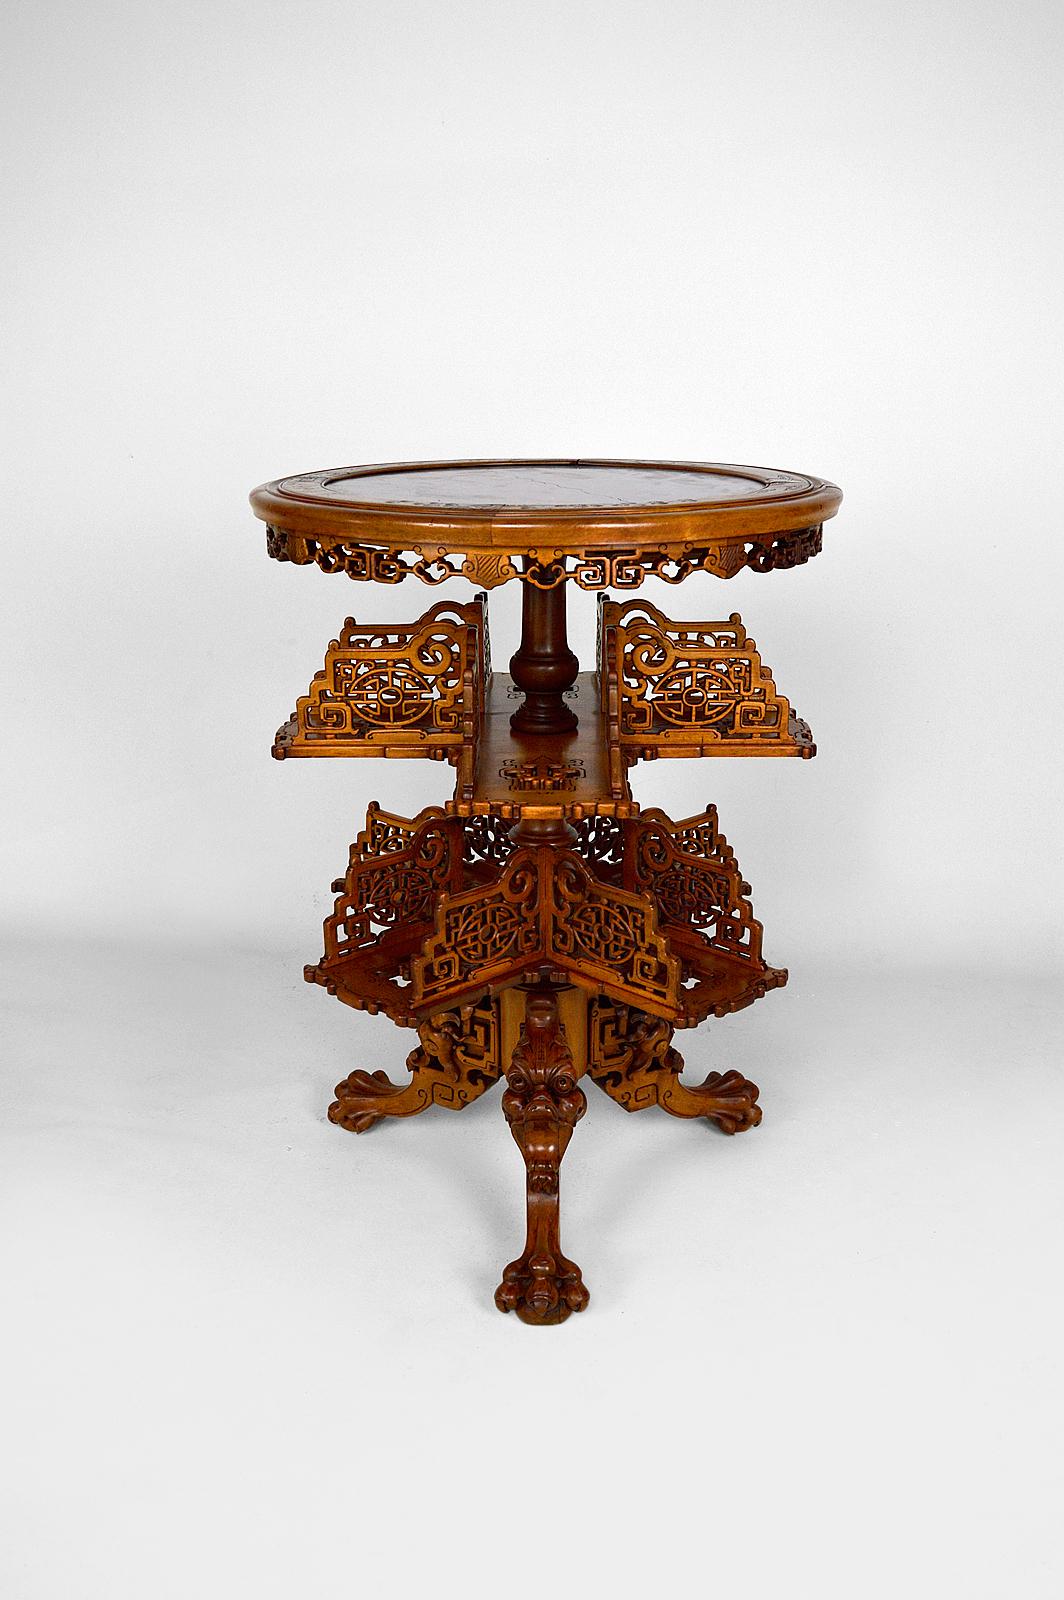 Rare pedestal table / bookcase in Japanese / Chinese / Asian style, richly carved.

With red marble top, swivel shelves and tripod base carved with dragon / demon heads and clawed legs.

Art Nouveau / Japonisme, France, around 1880.
By Gabriel